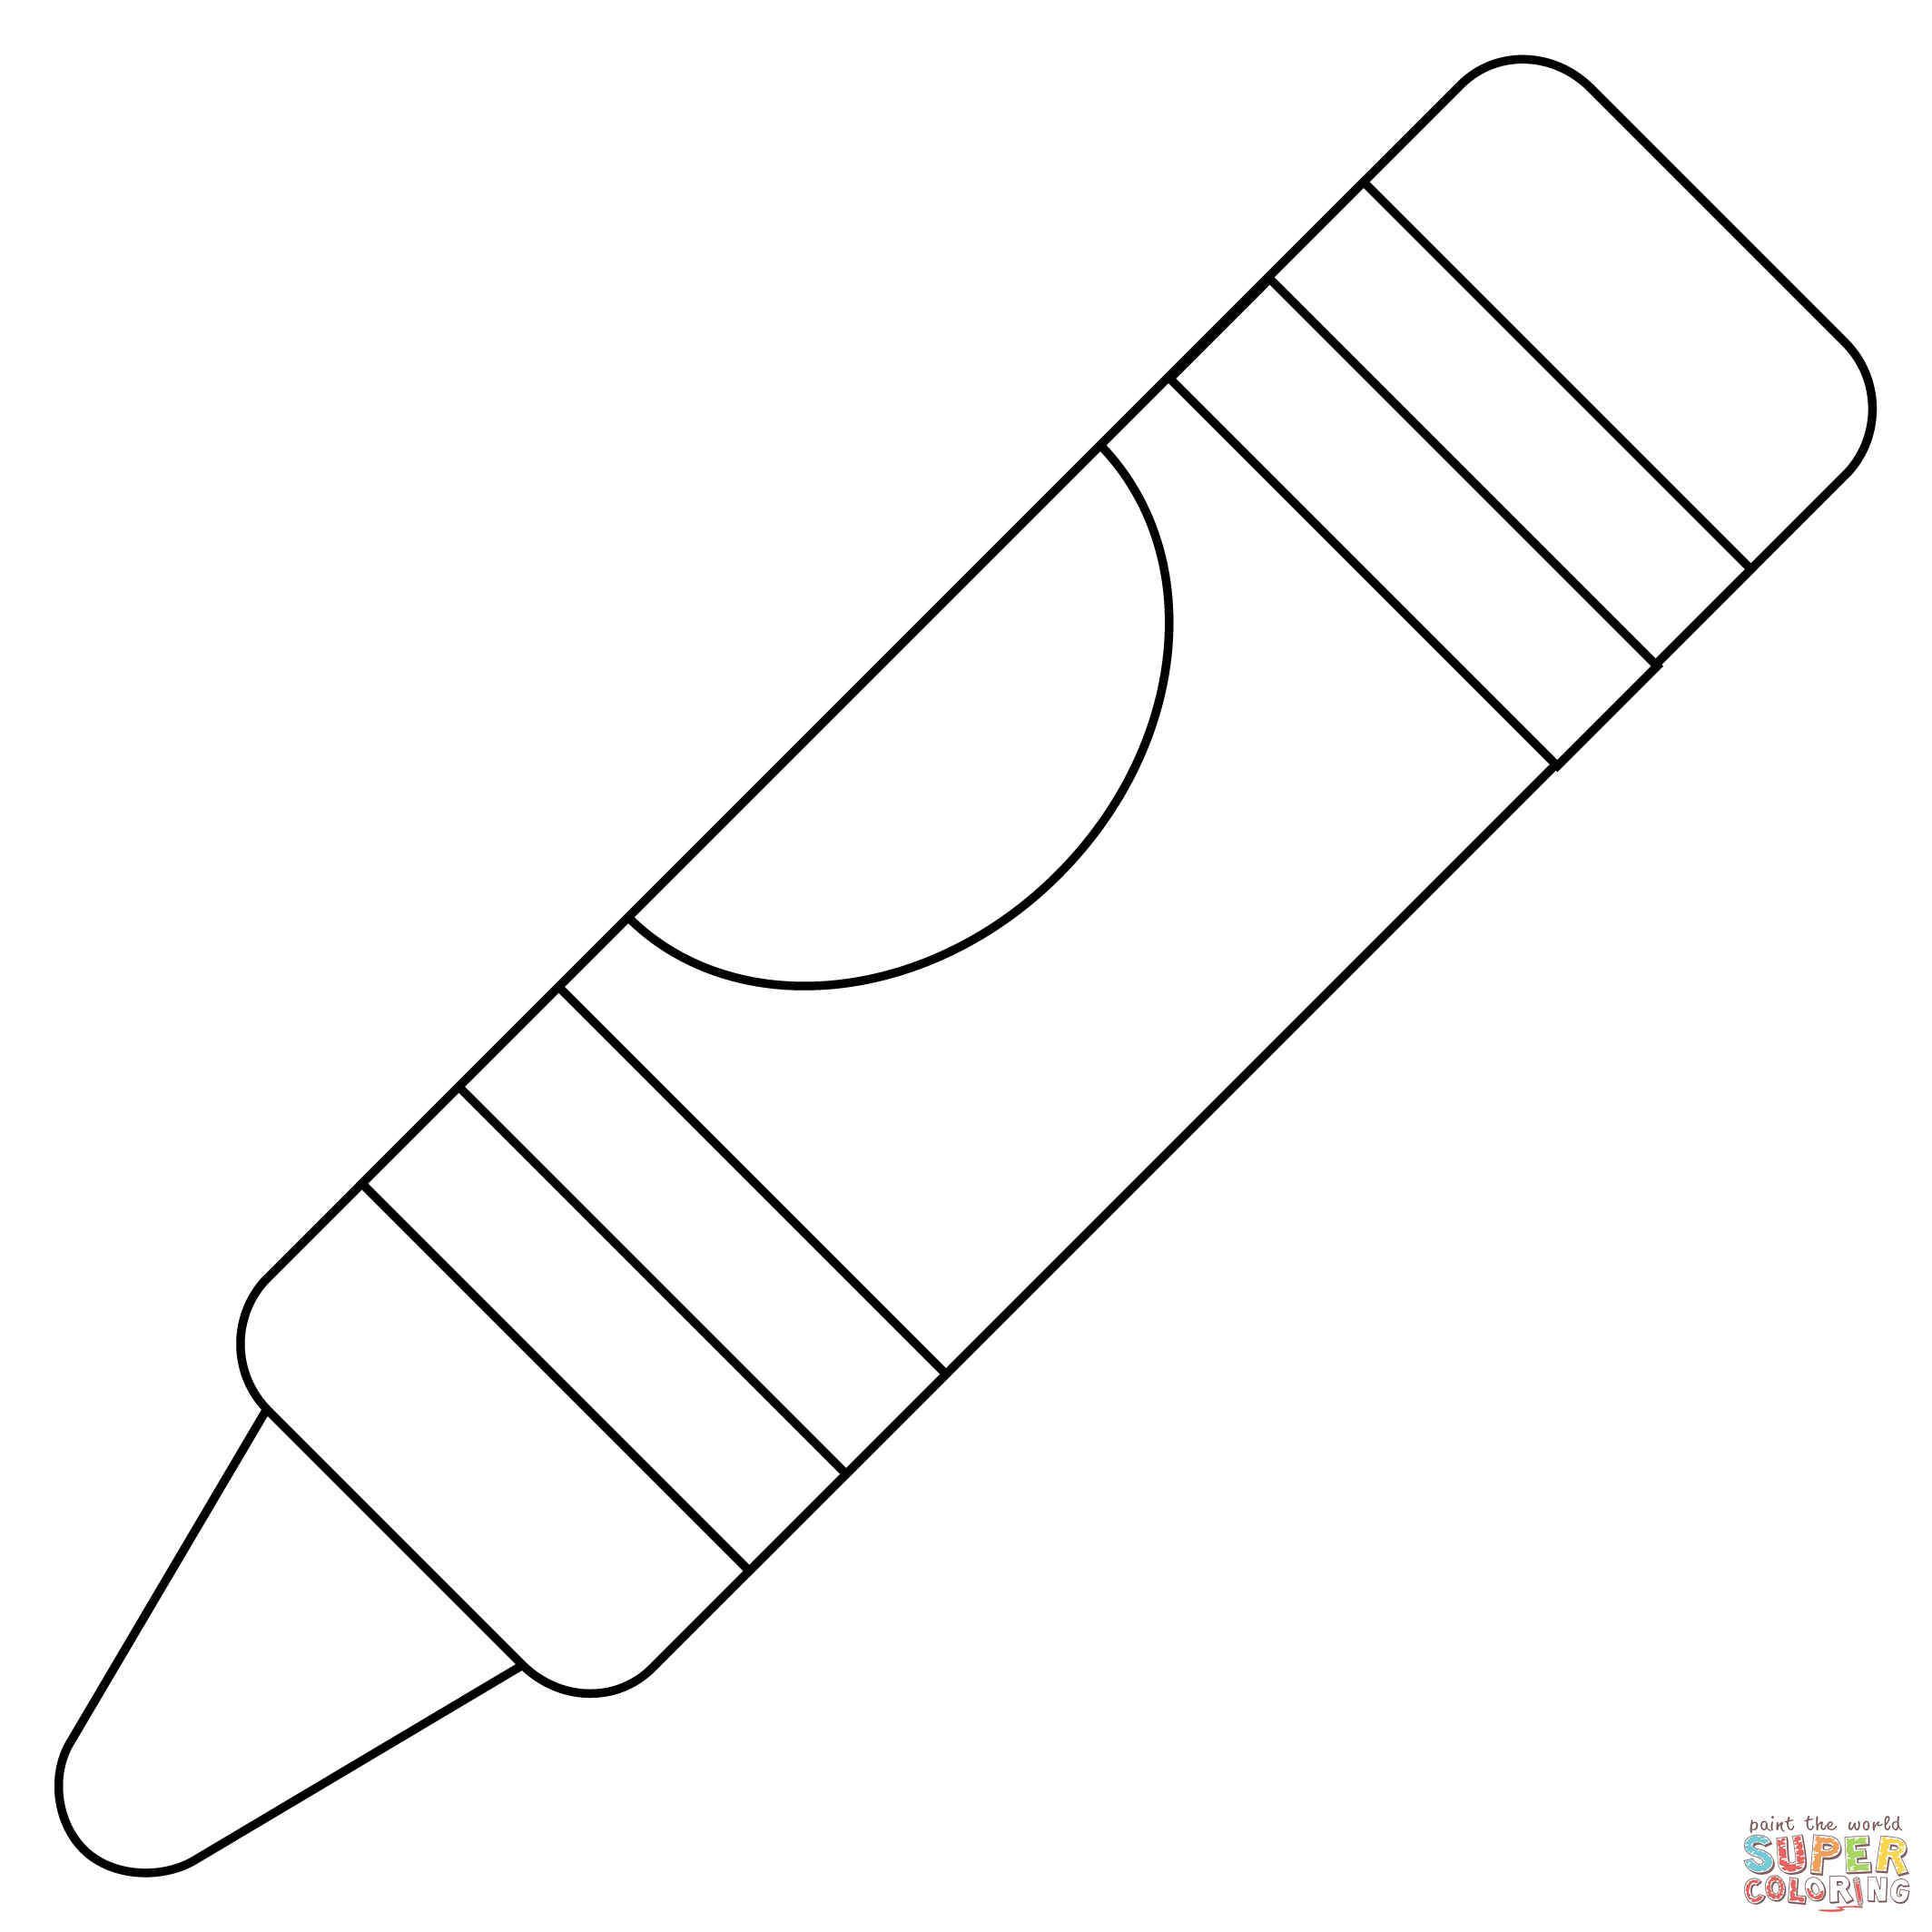 Crayon coloring page free printable coloring pages